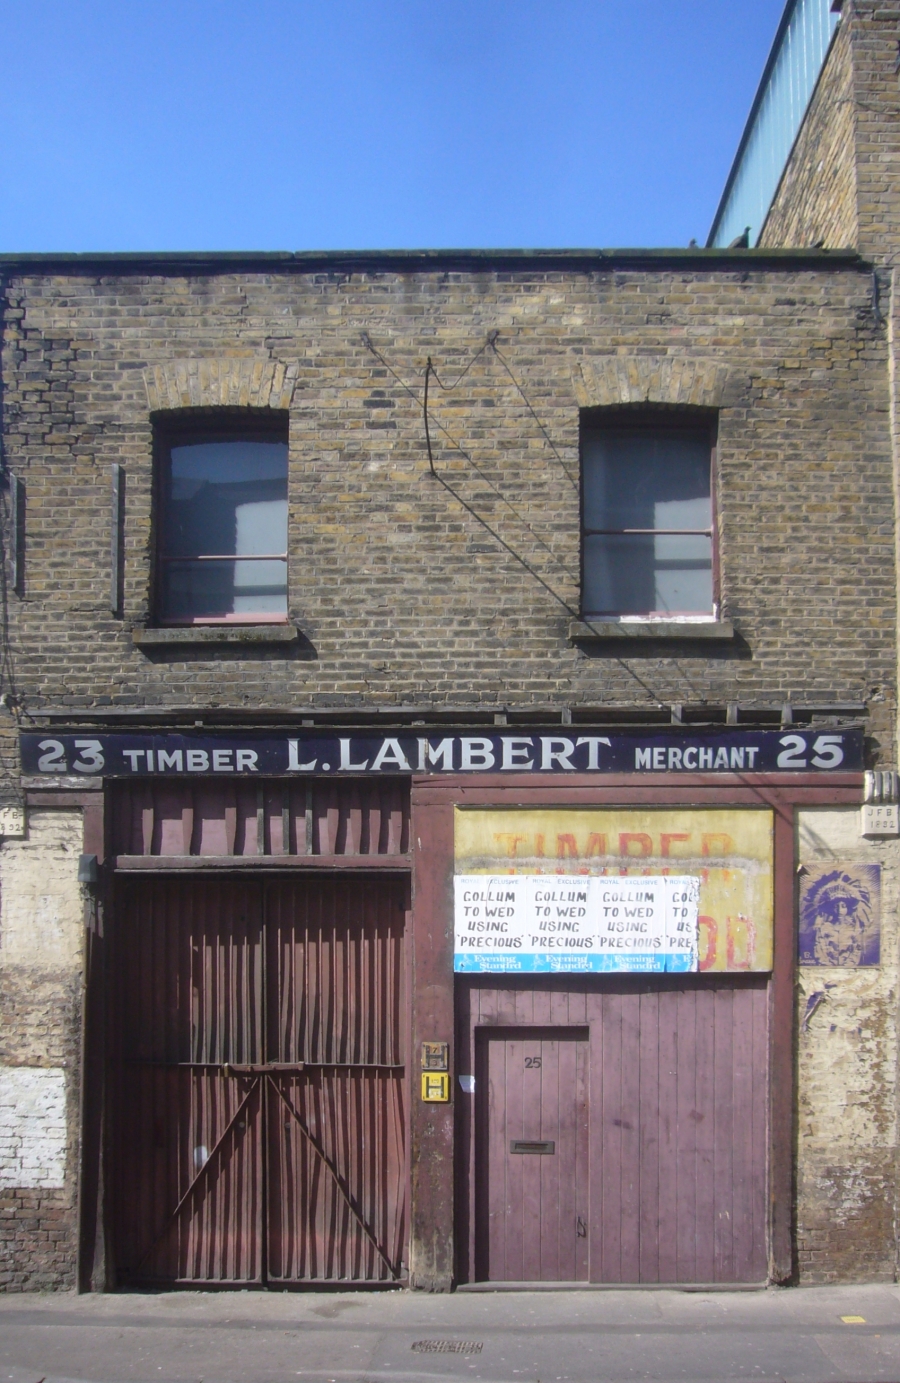 Two-storey warehouse building, formerly home of L. Lambert, Timber Merchant.